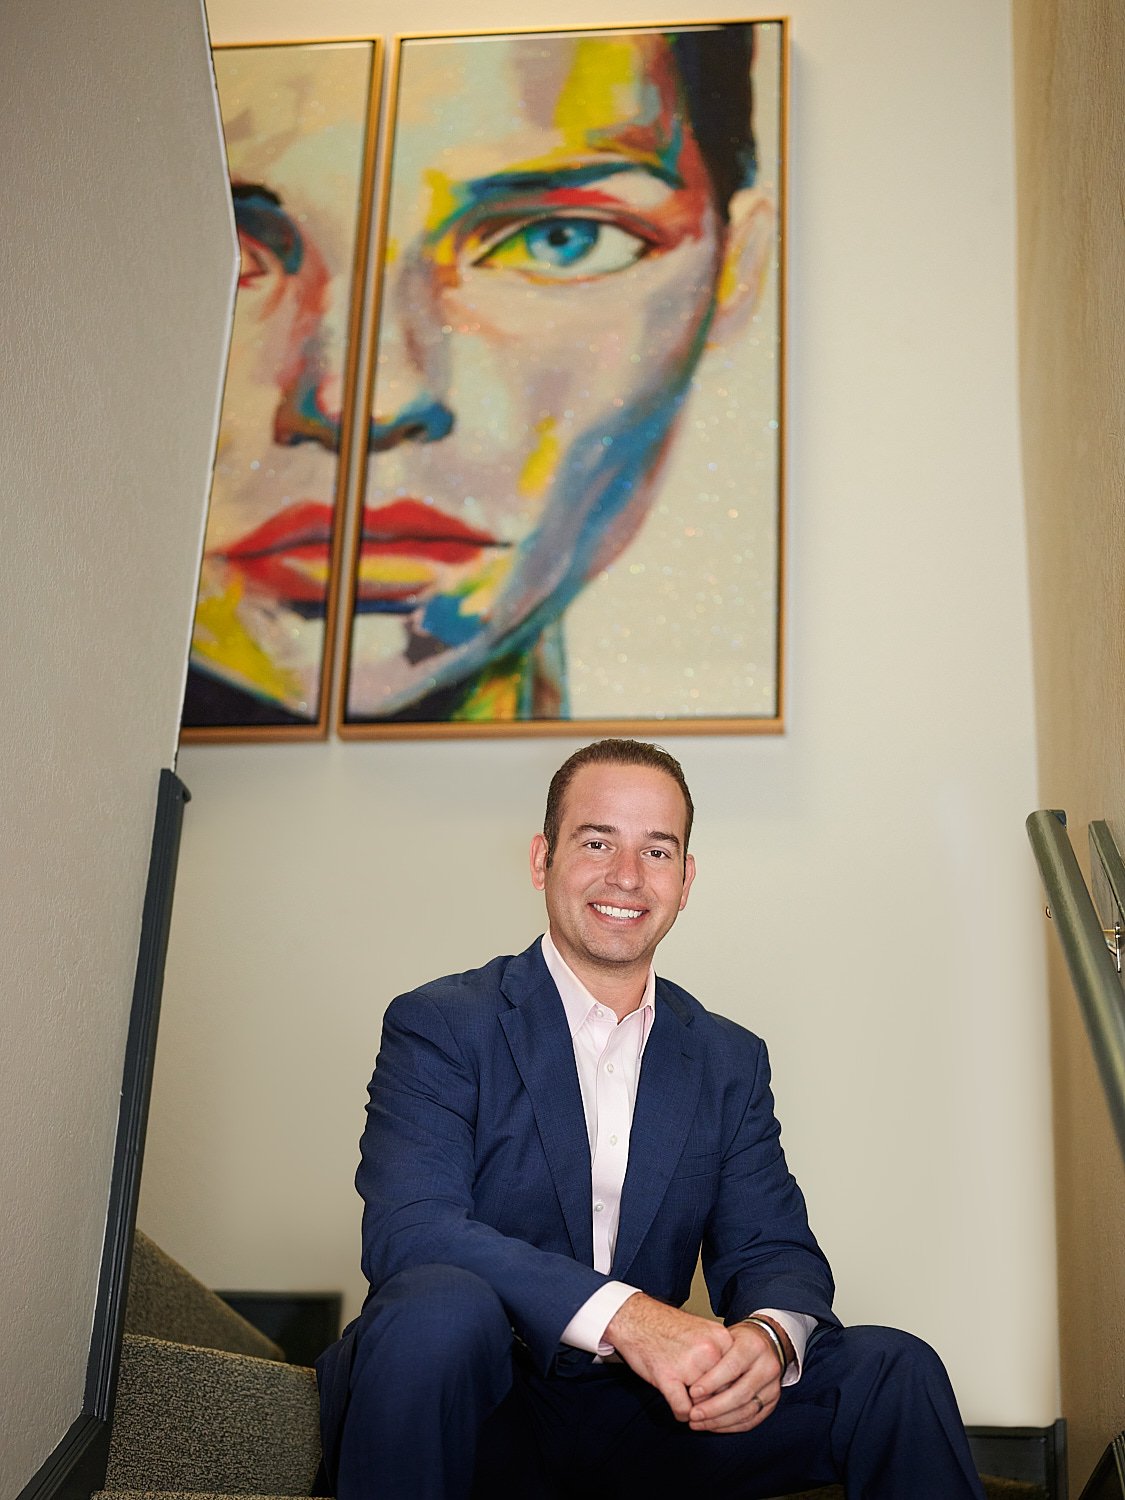  THE WOODLANDS, TEXAS - MARCH 2023: plastic surgeon is posing for environmental business headshots in his medical clinic full of beautiful artwork. He is dressed in a business suit without a tie 